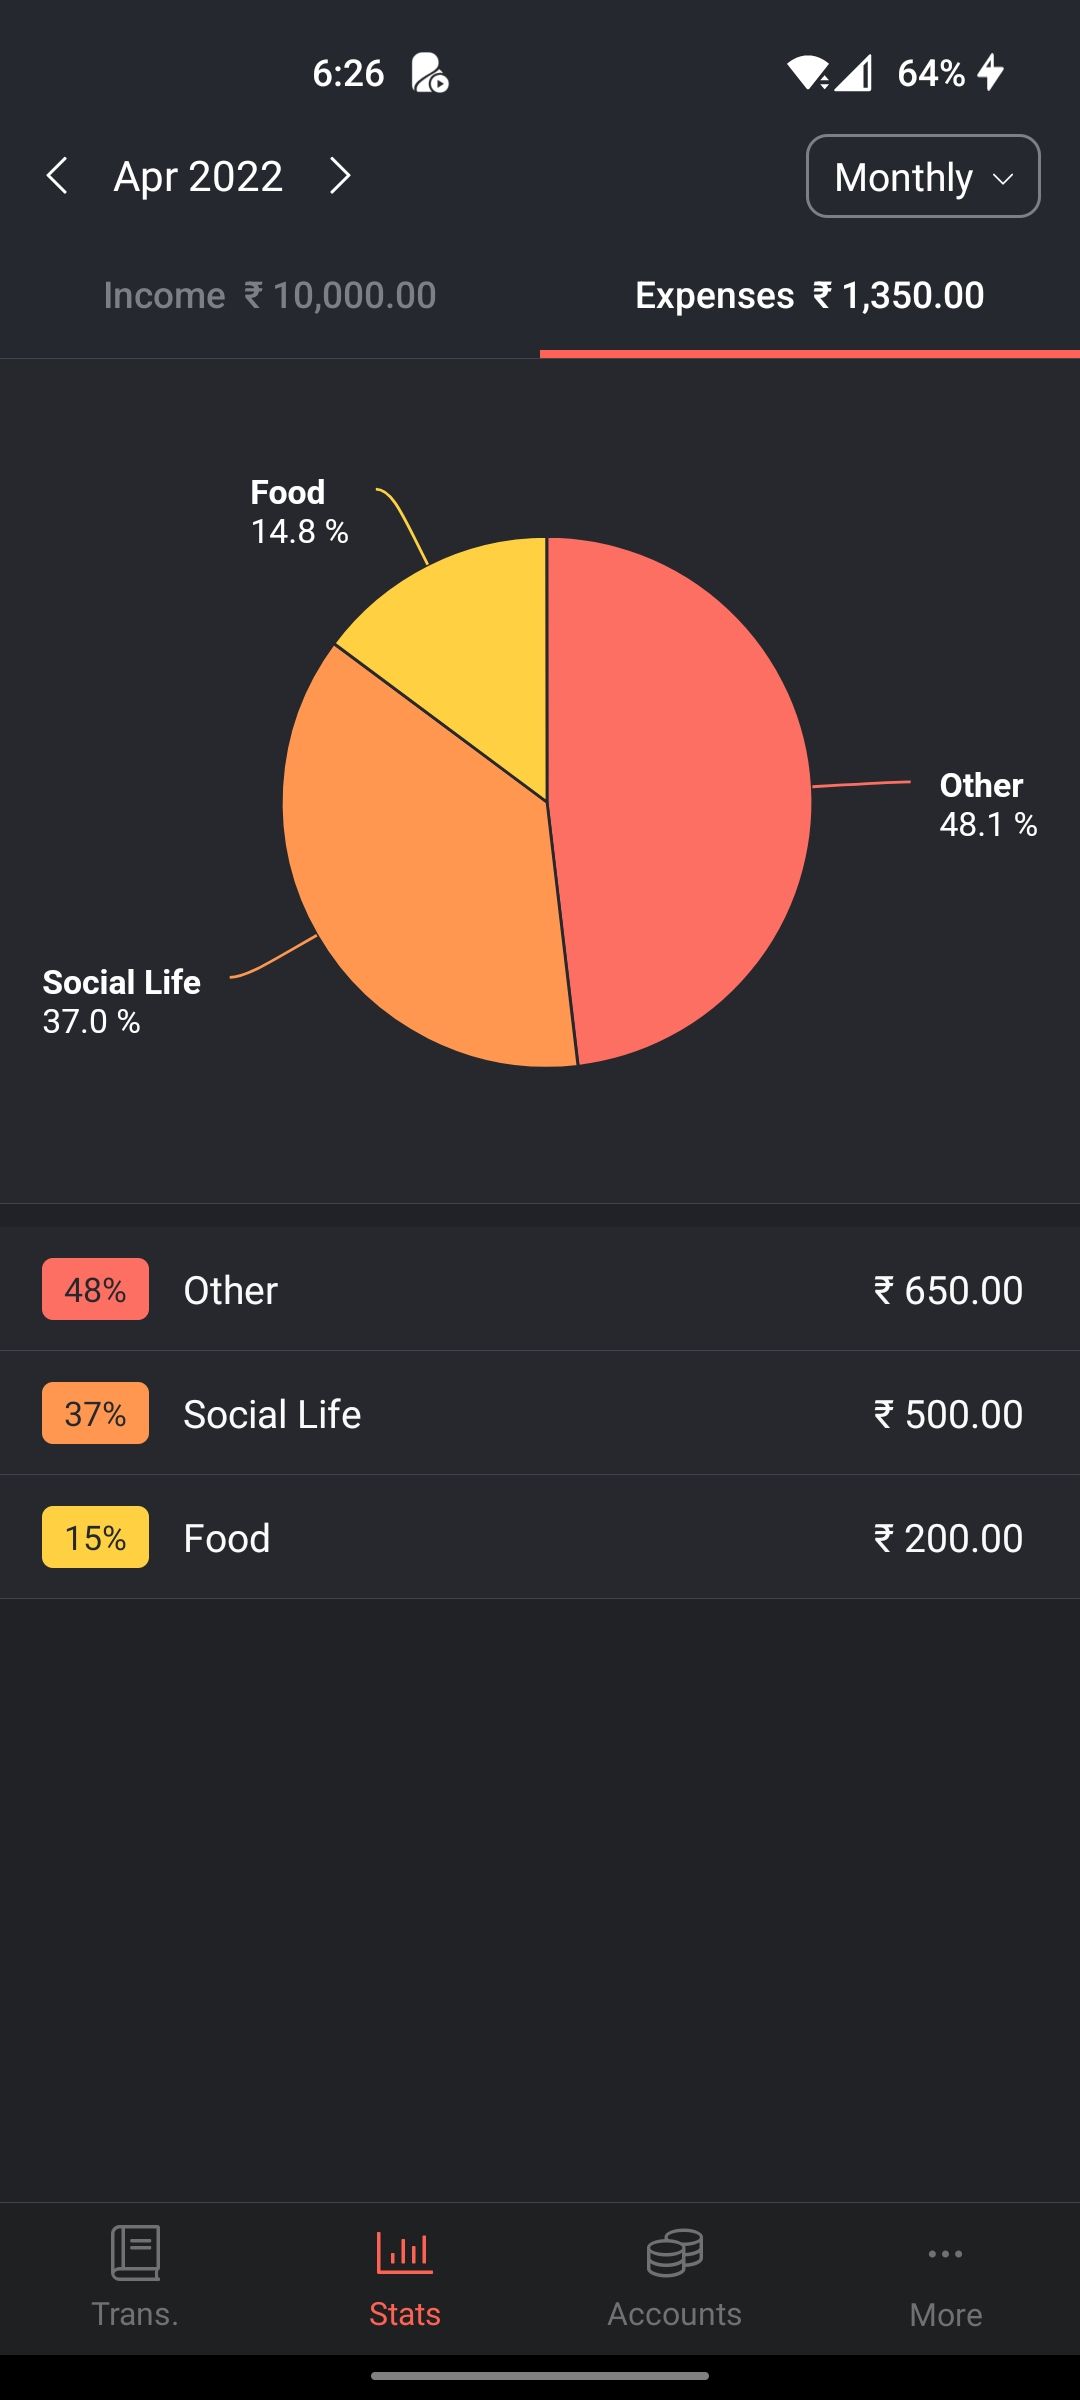 Expenses statistics in the form of a pie chart